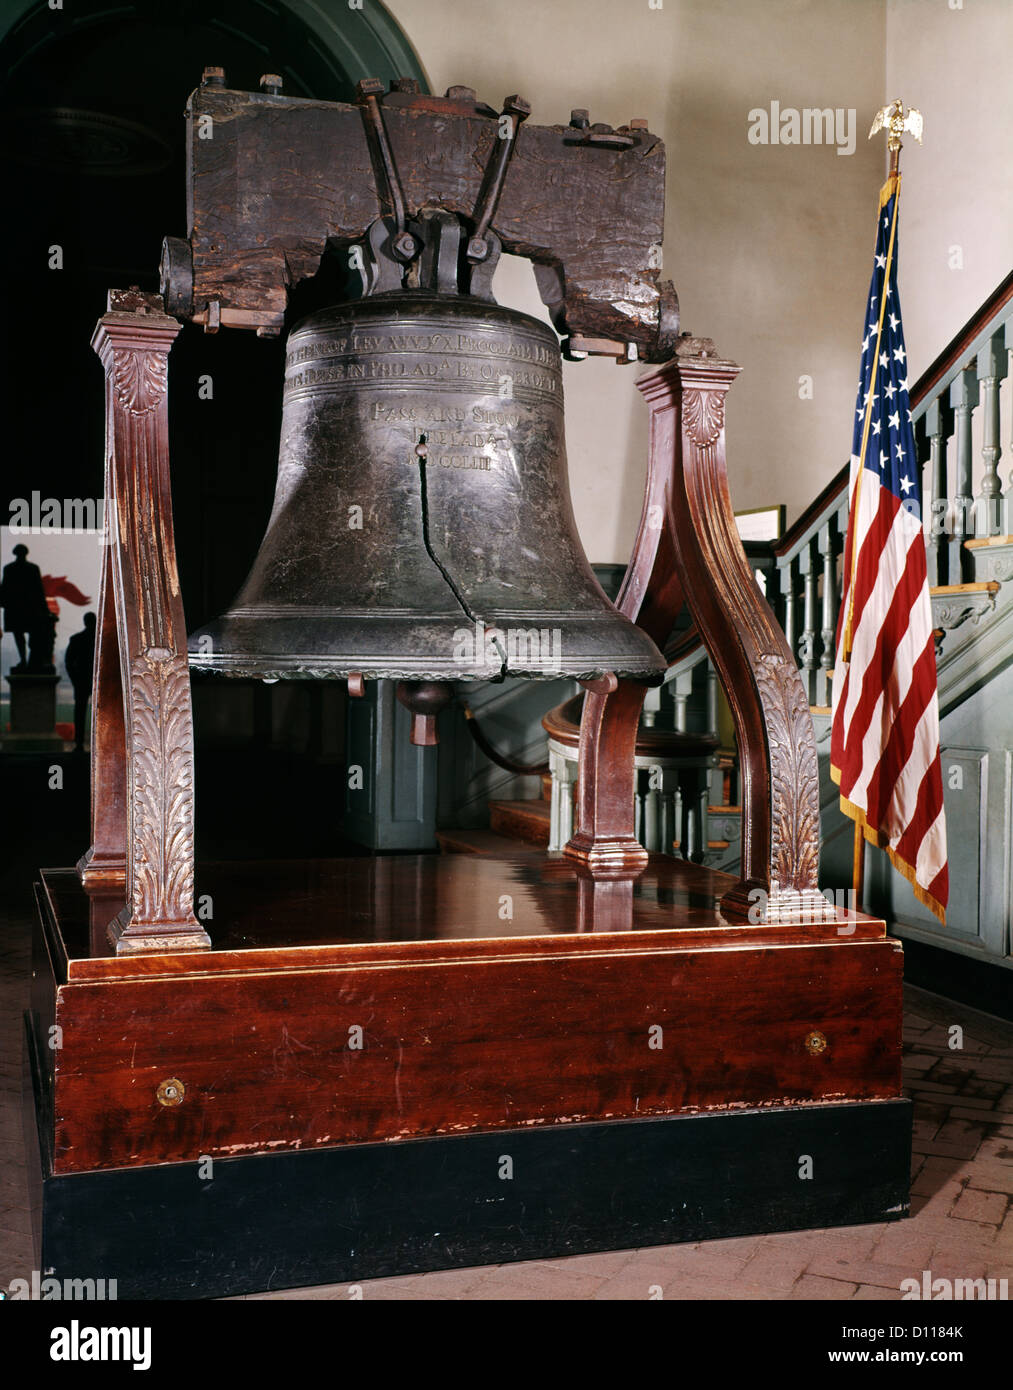 1960 MONUMENT LIBERTY BELL Banque D'Images